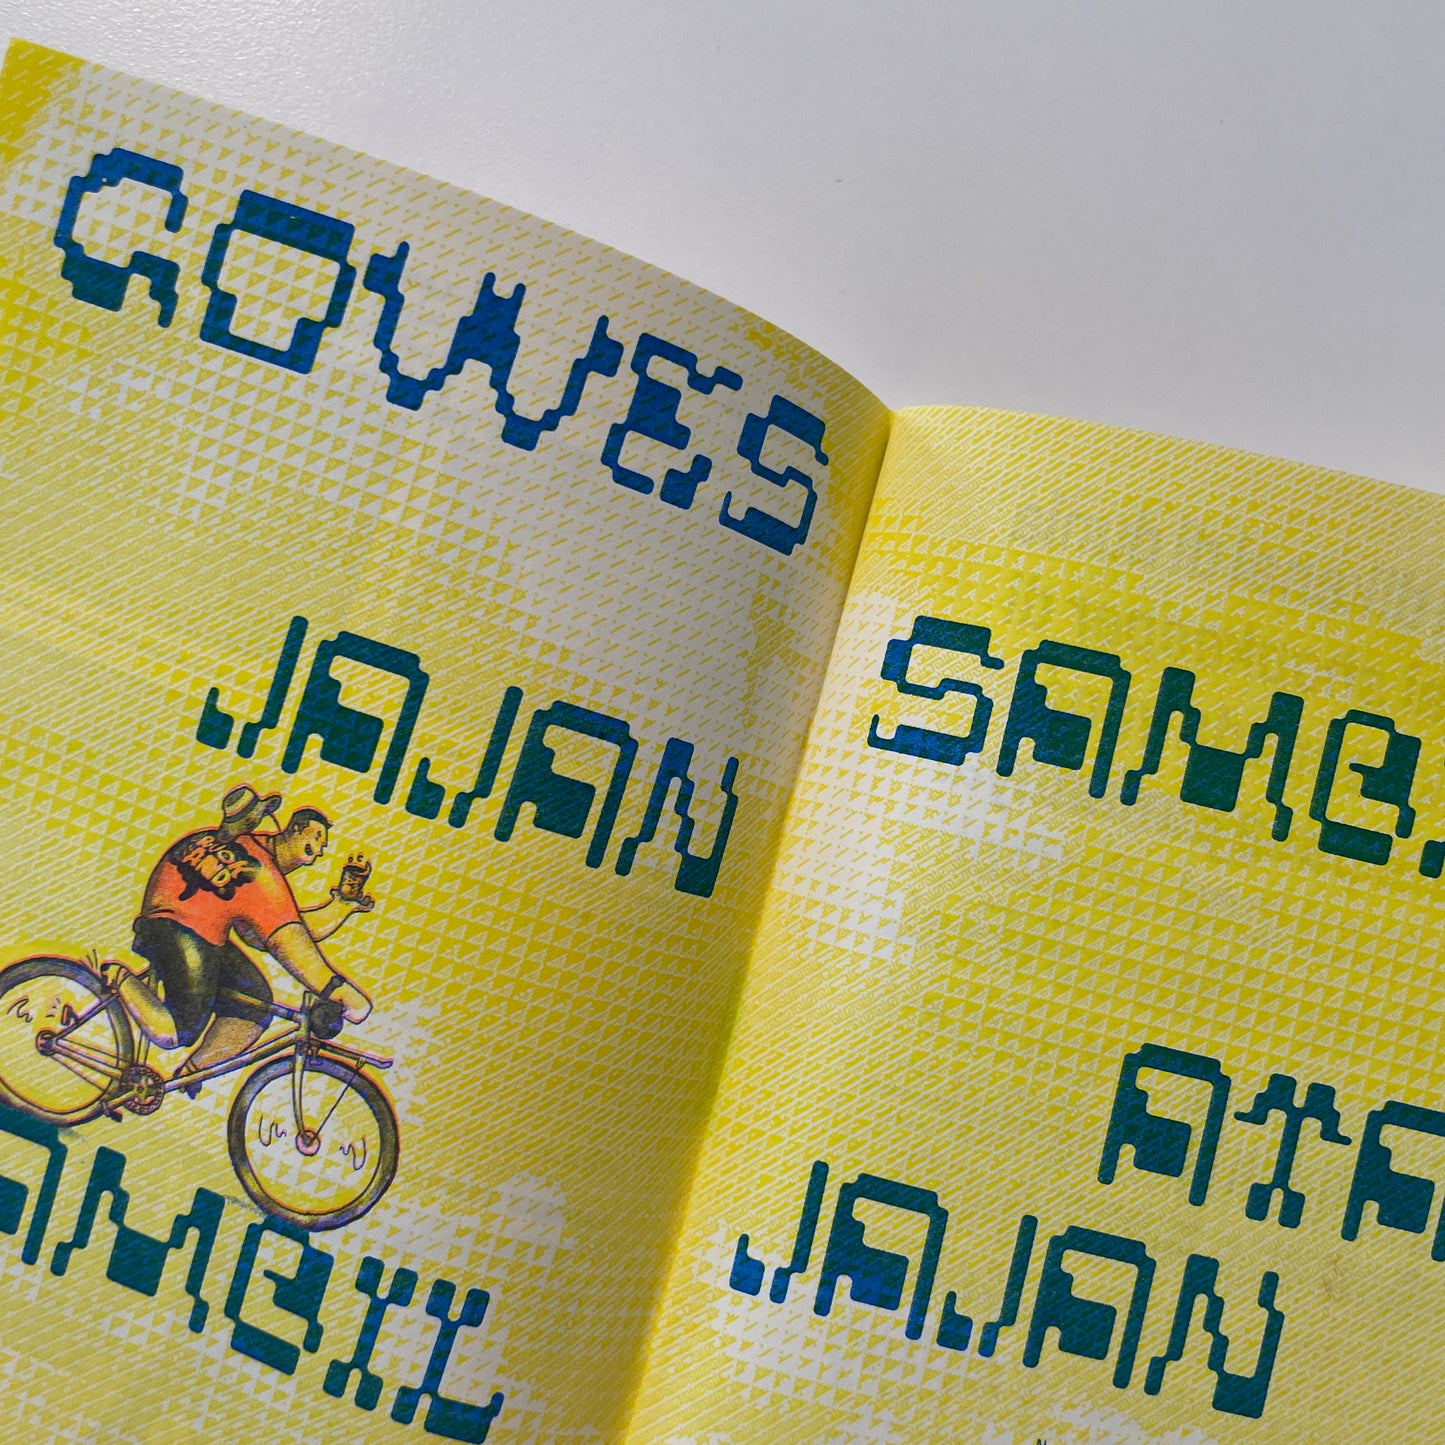 Gowezine - Cycling Culture from Jakarta 2020